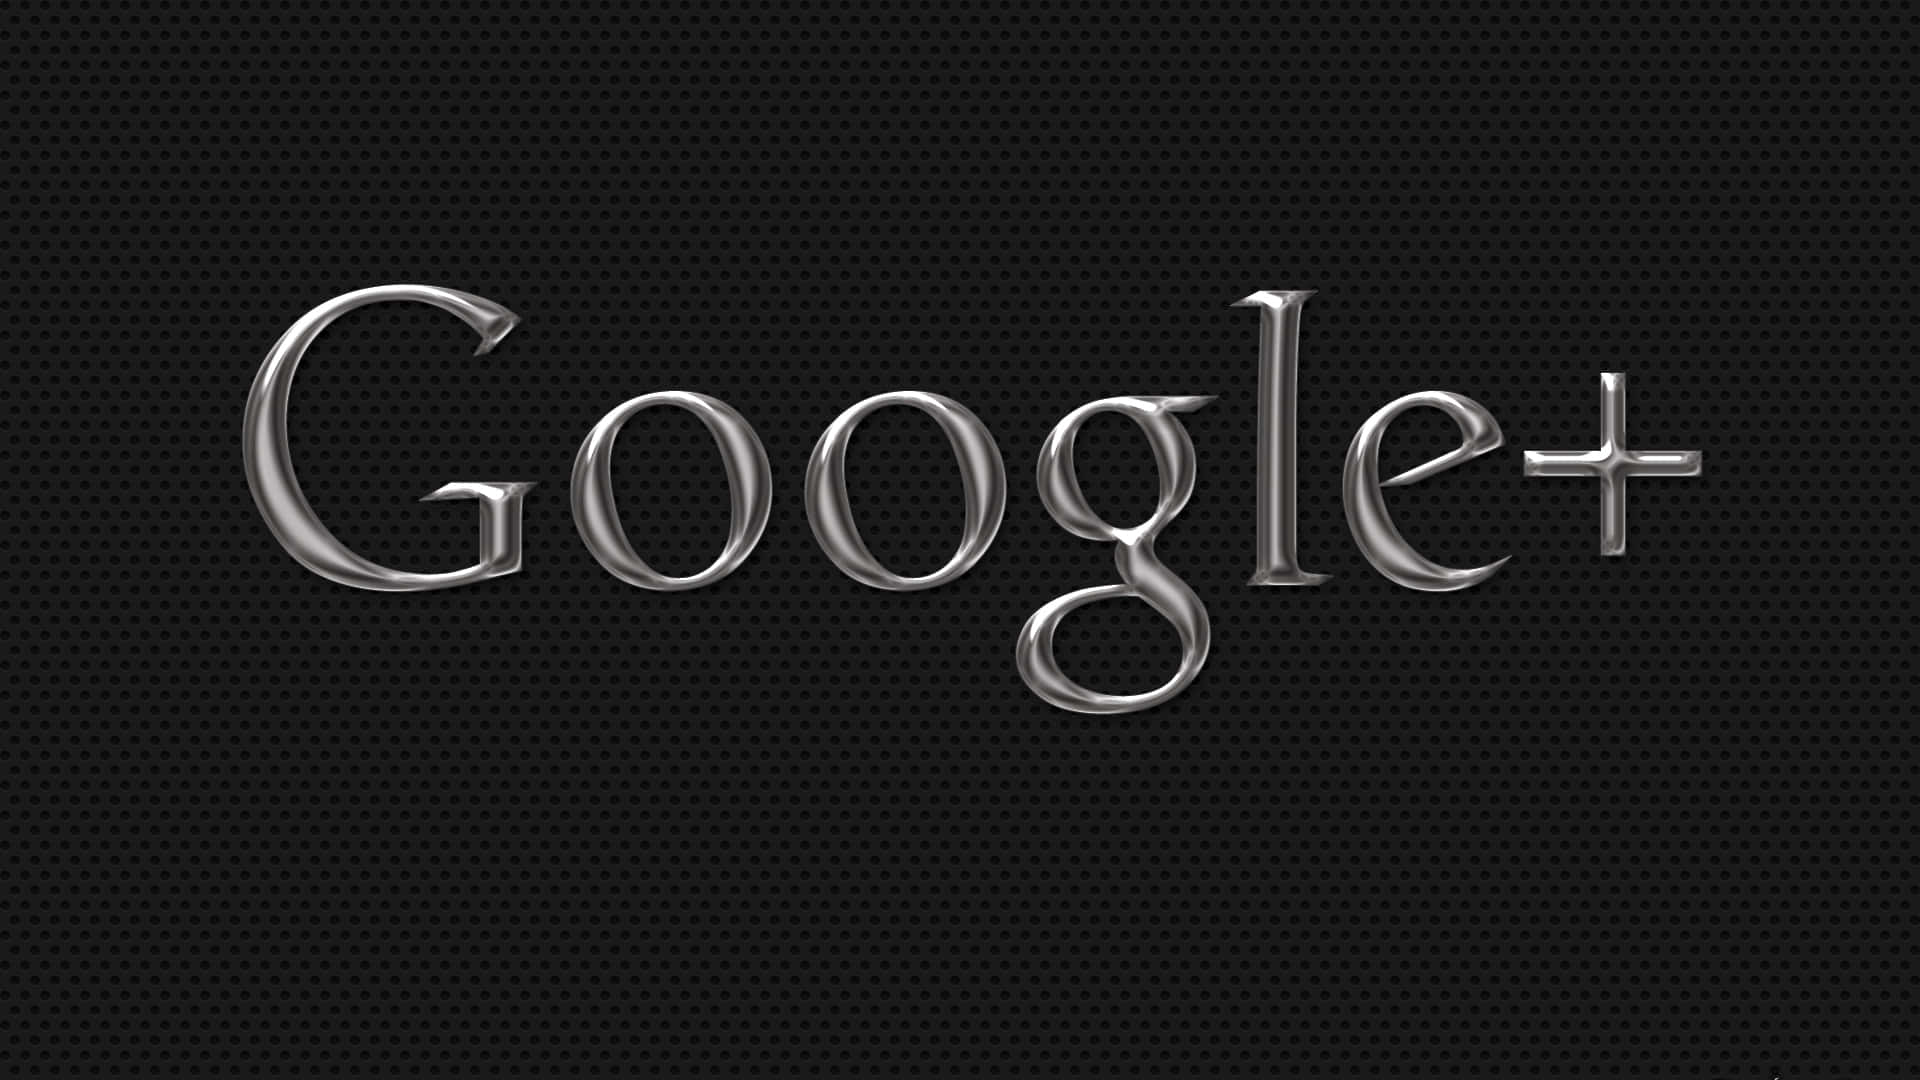 Google Best, Experience Quality Technology Wallpaper